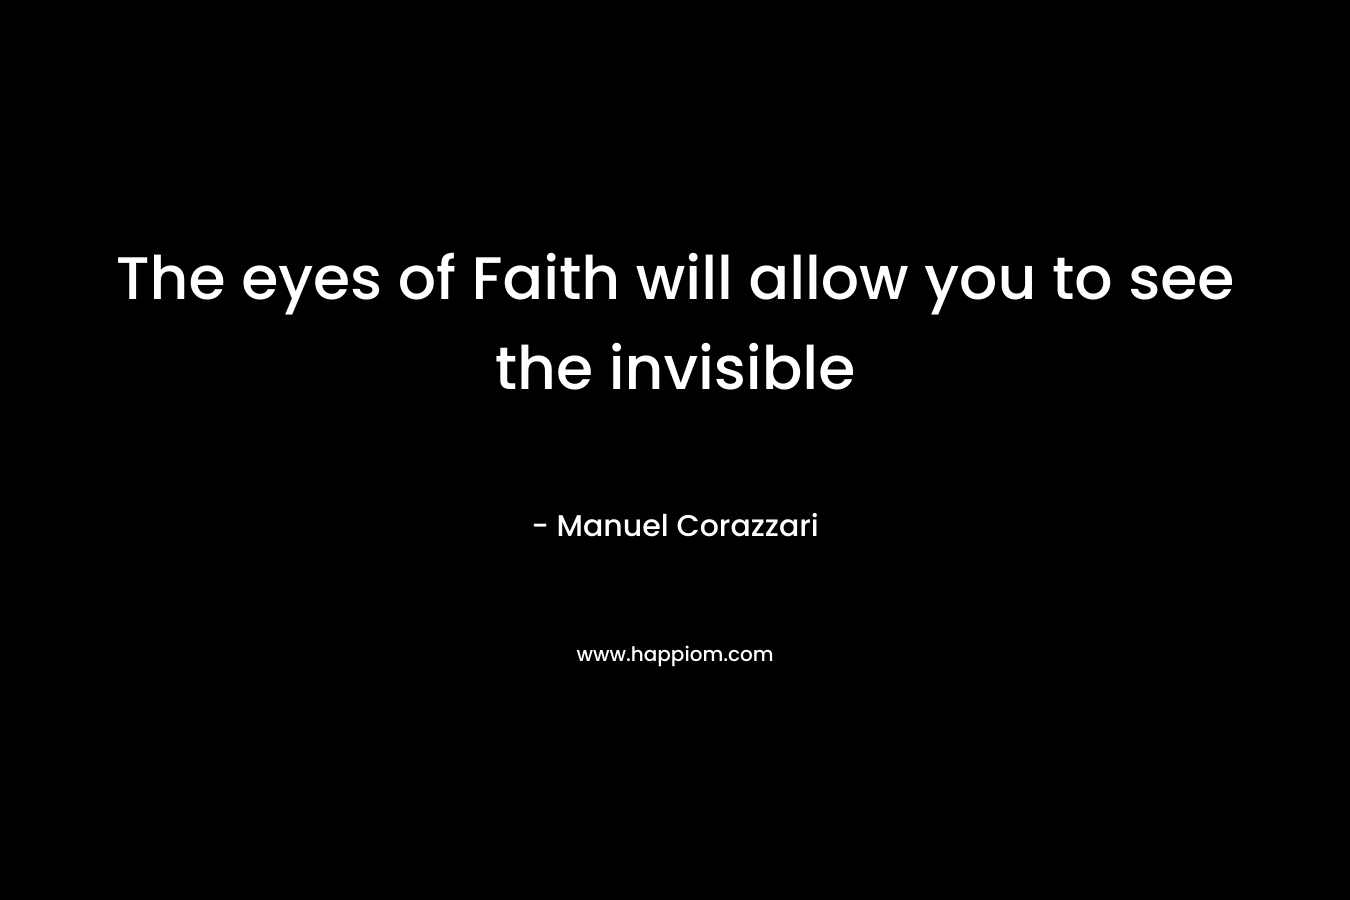 The eyes of Faith will allow you to see the invisible